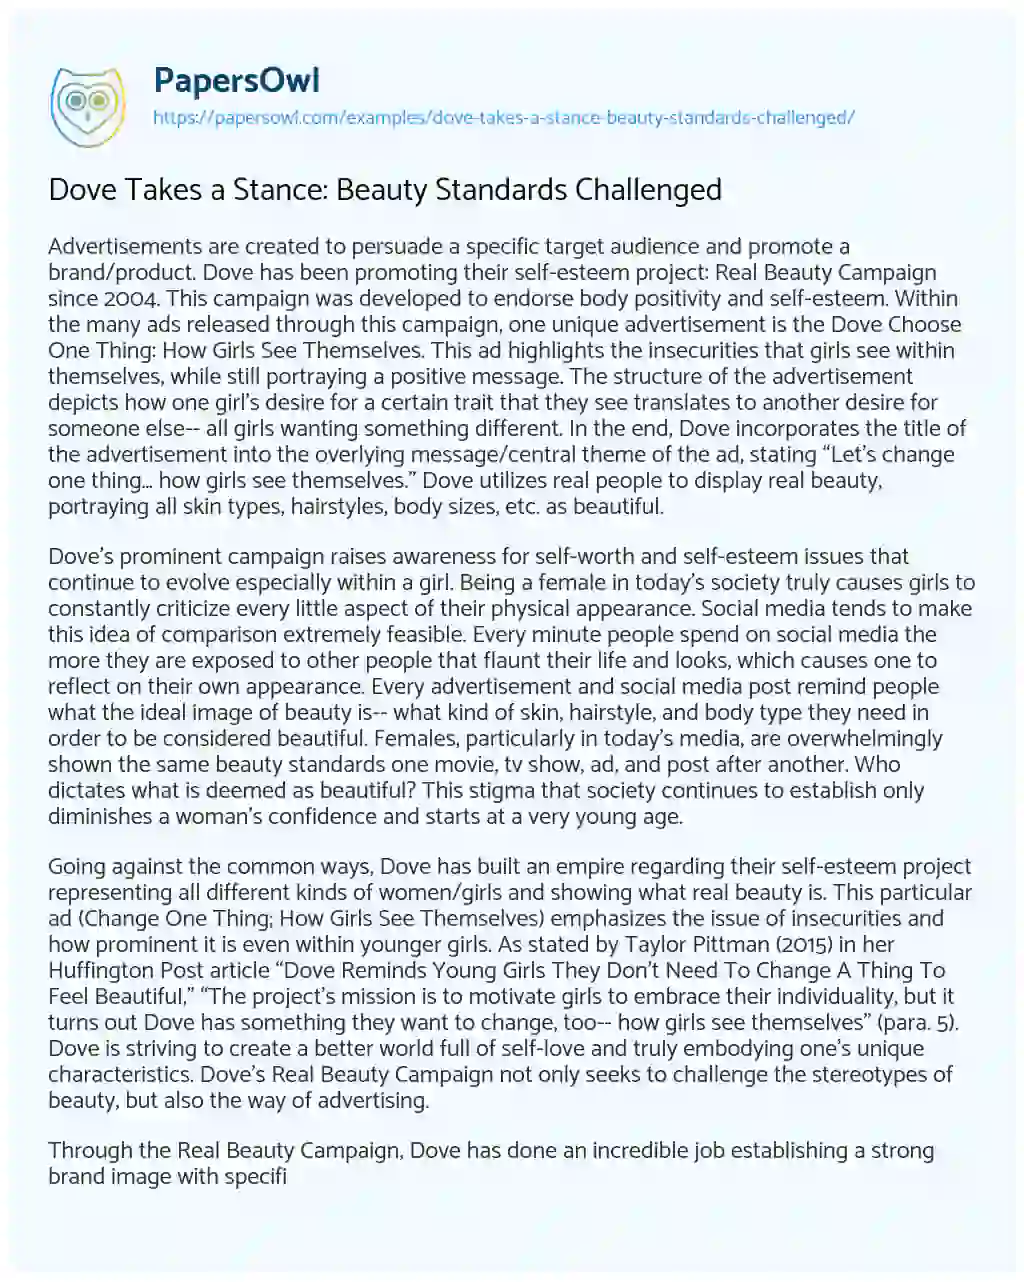 Essay on Dove Takes a Stance: Beauty Standards Challenged 